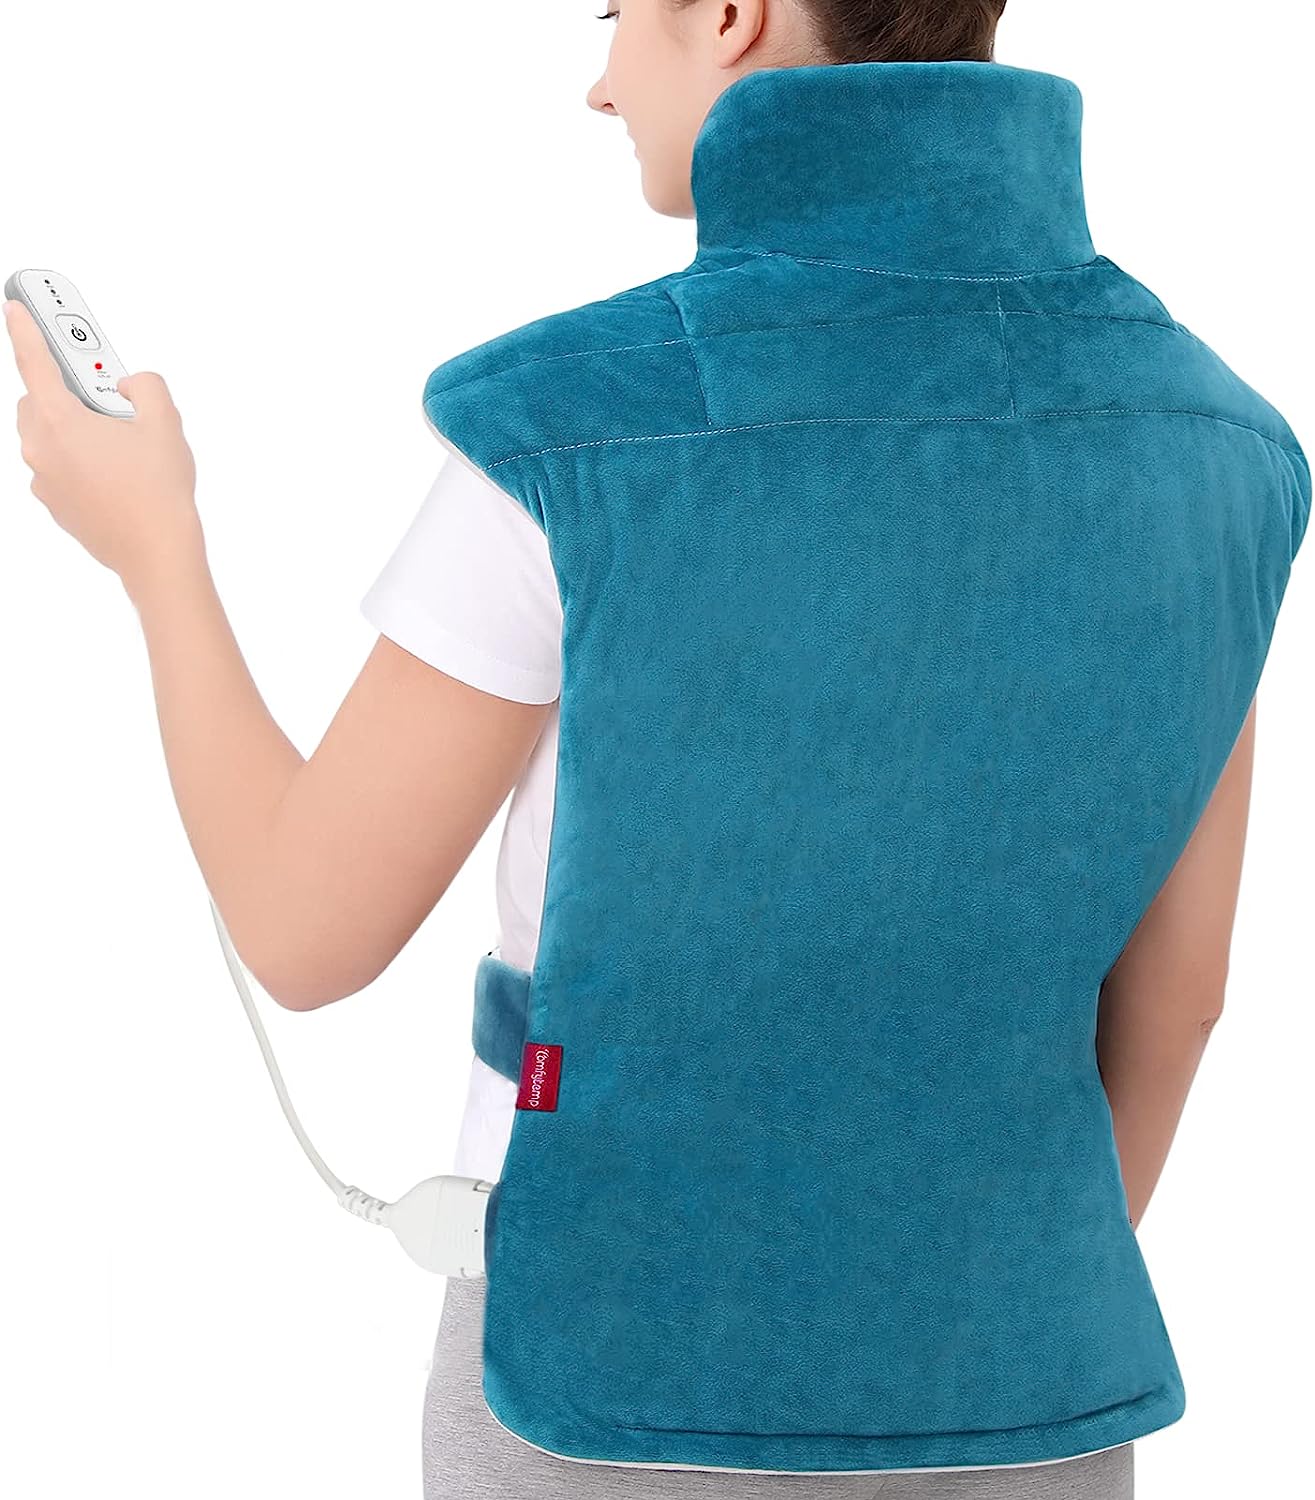 comfytemp weighted heating pad for back pain relief